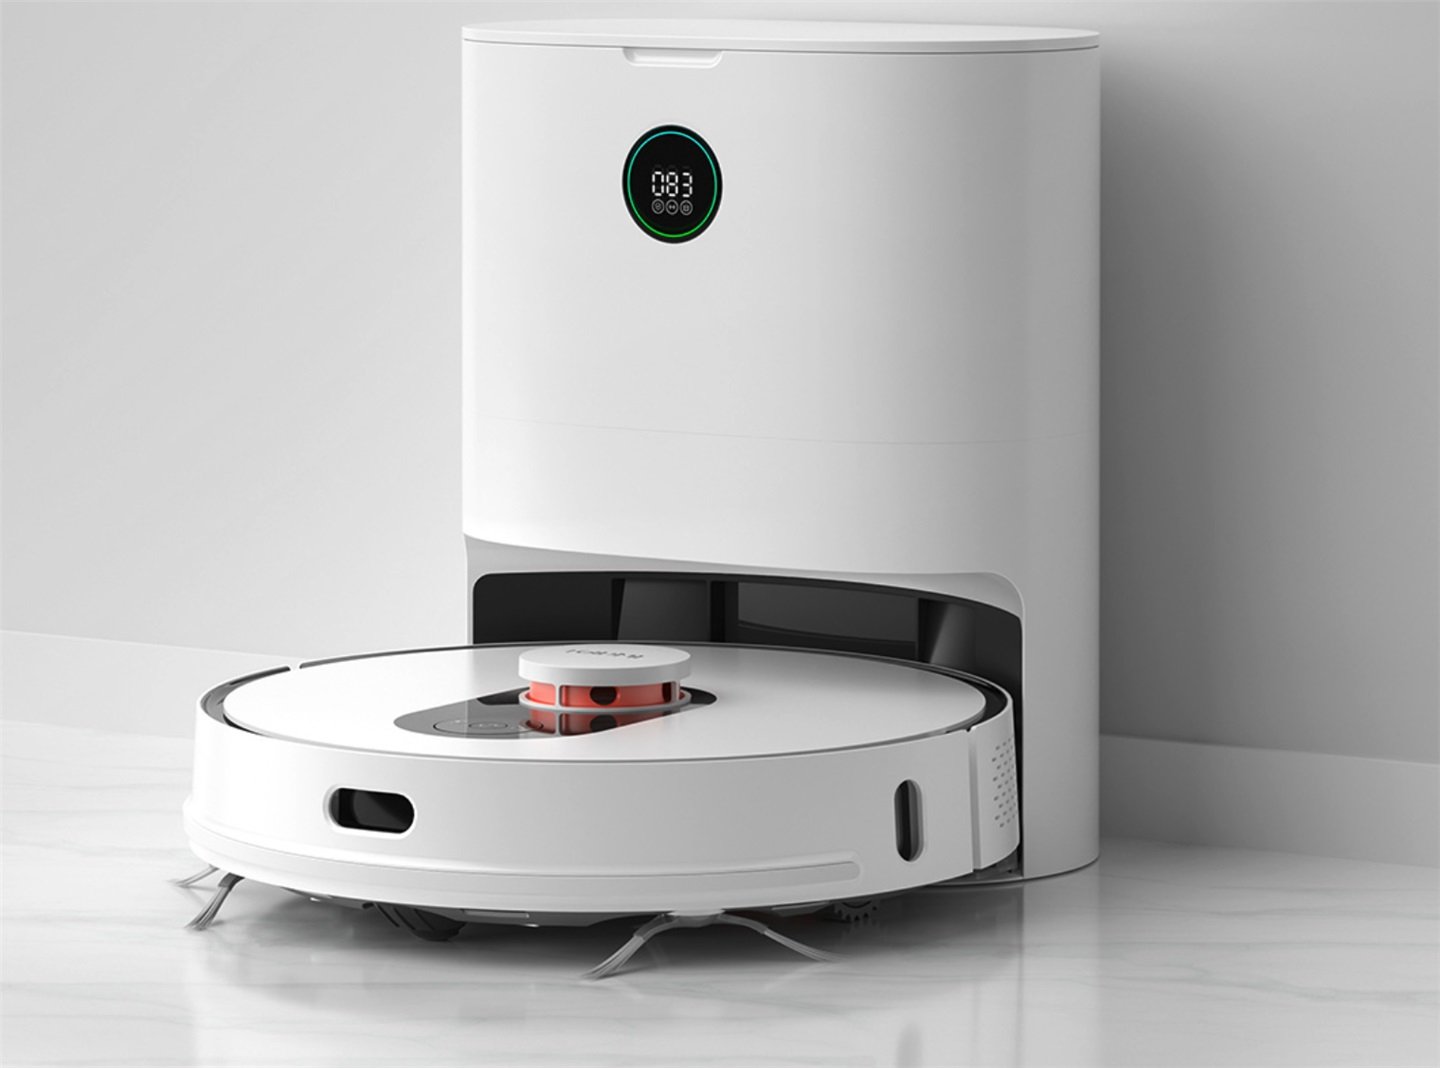 Xiaomi launches the Roidmi Self-collecting Robot Vacuum for 2,999 yuan (~$463)